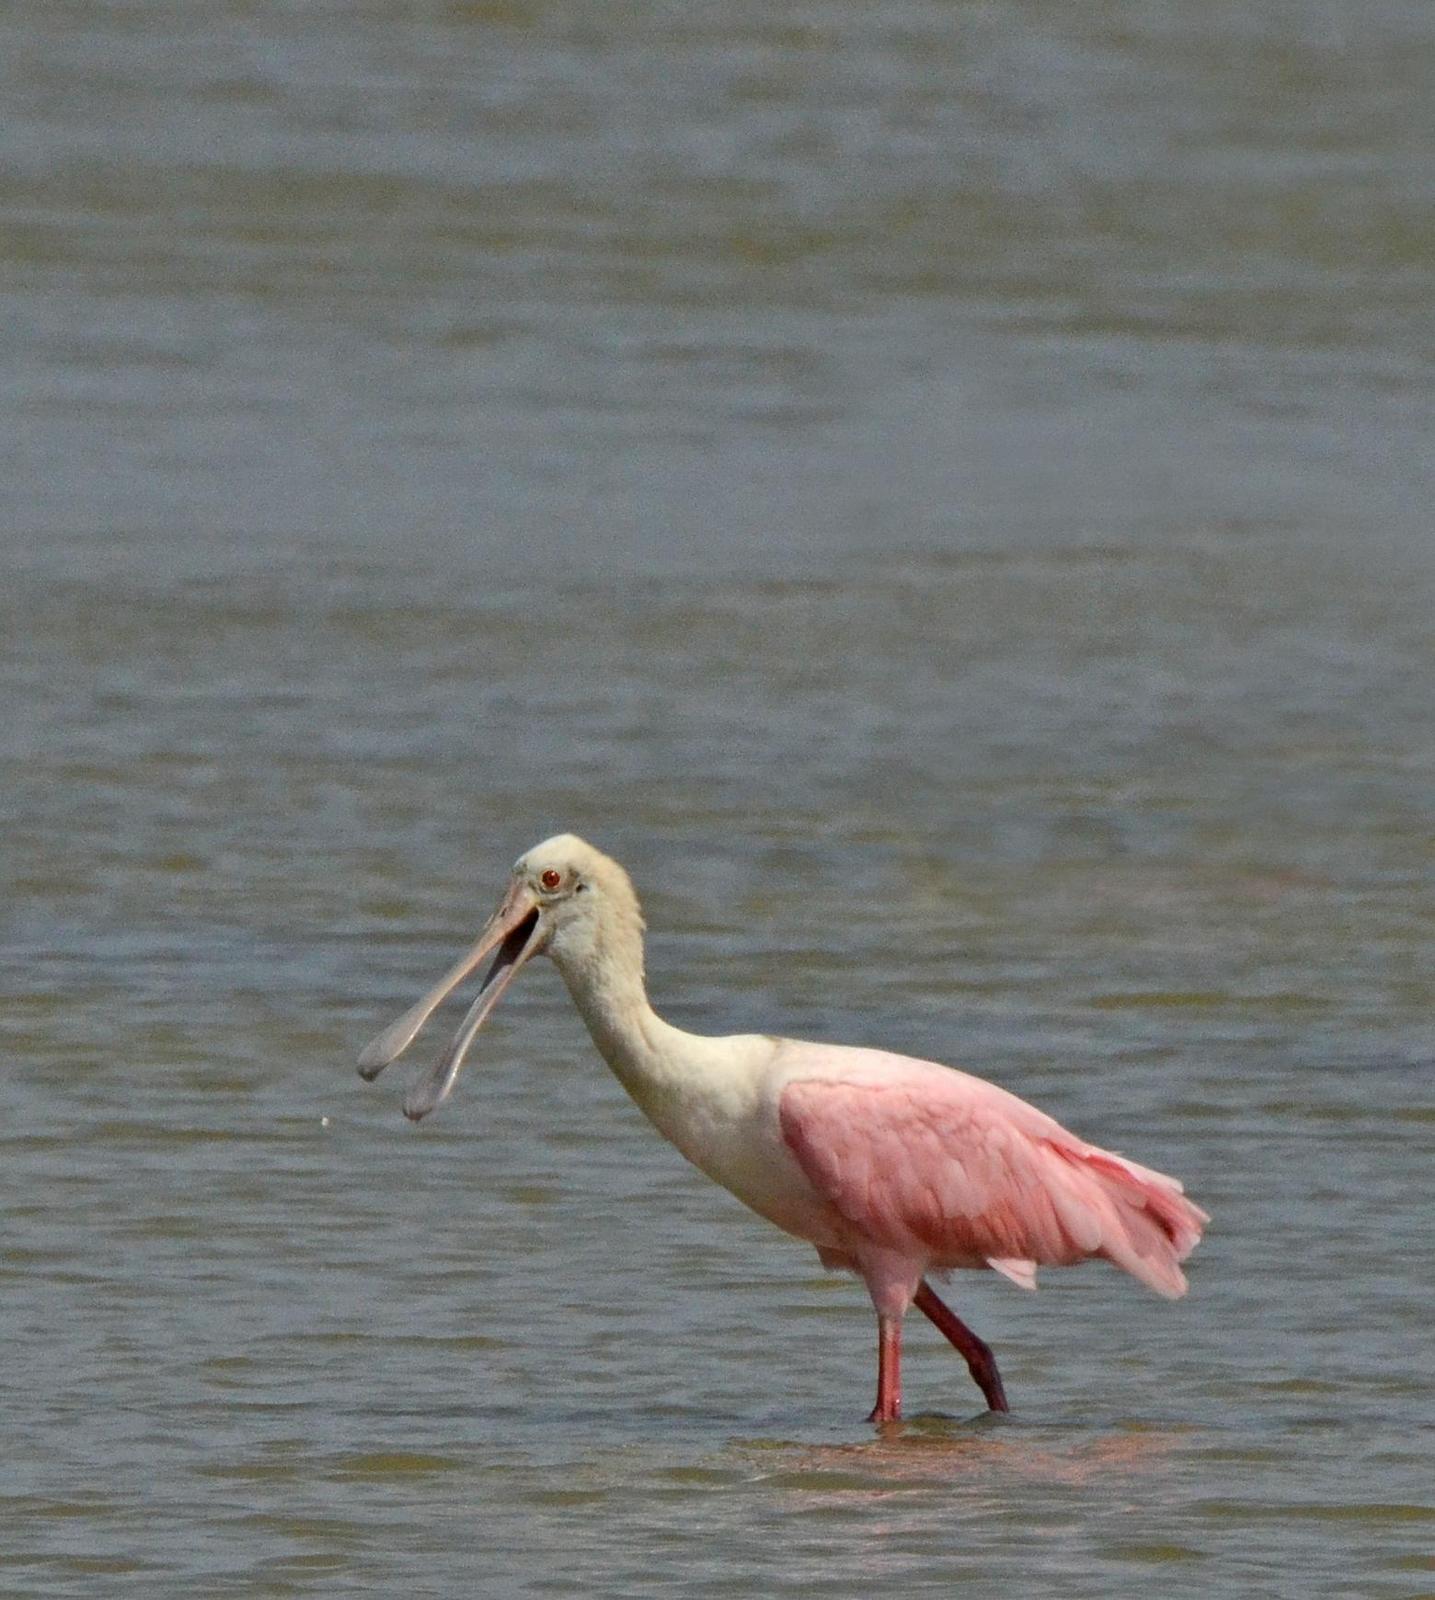 Roseate Spoonbill Photo by Steven Mlodinow